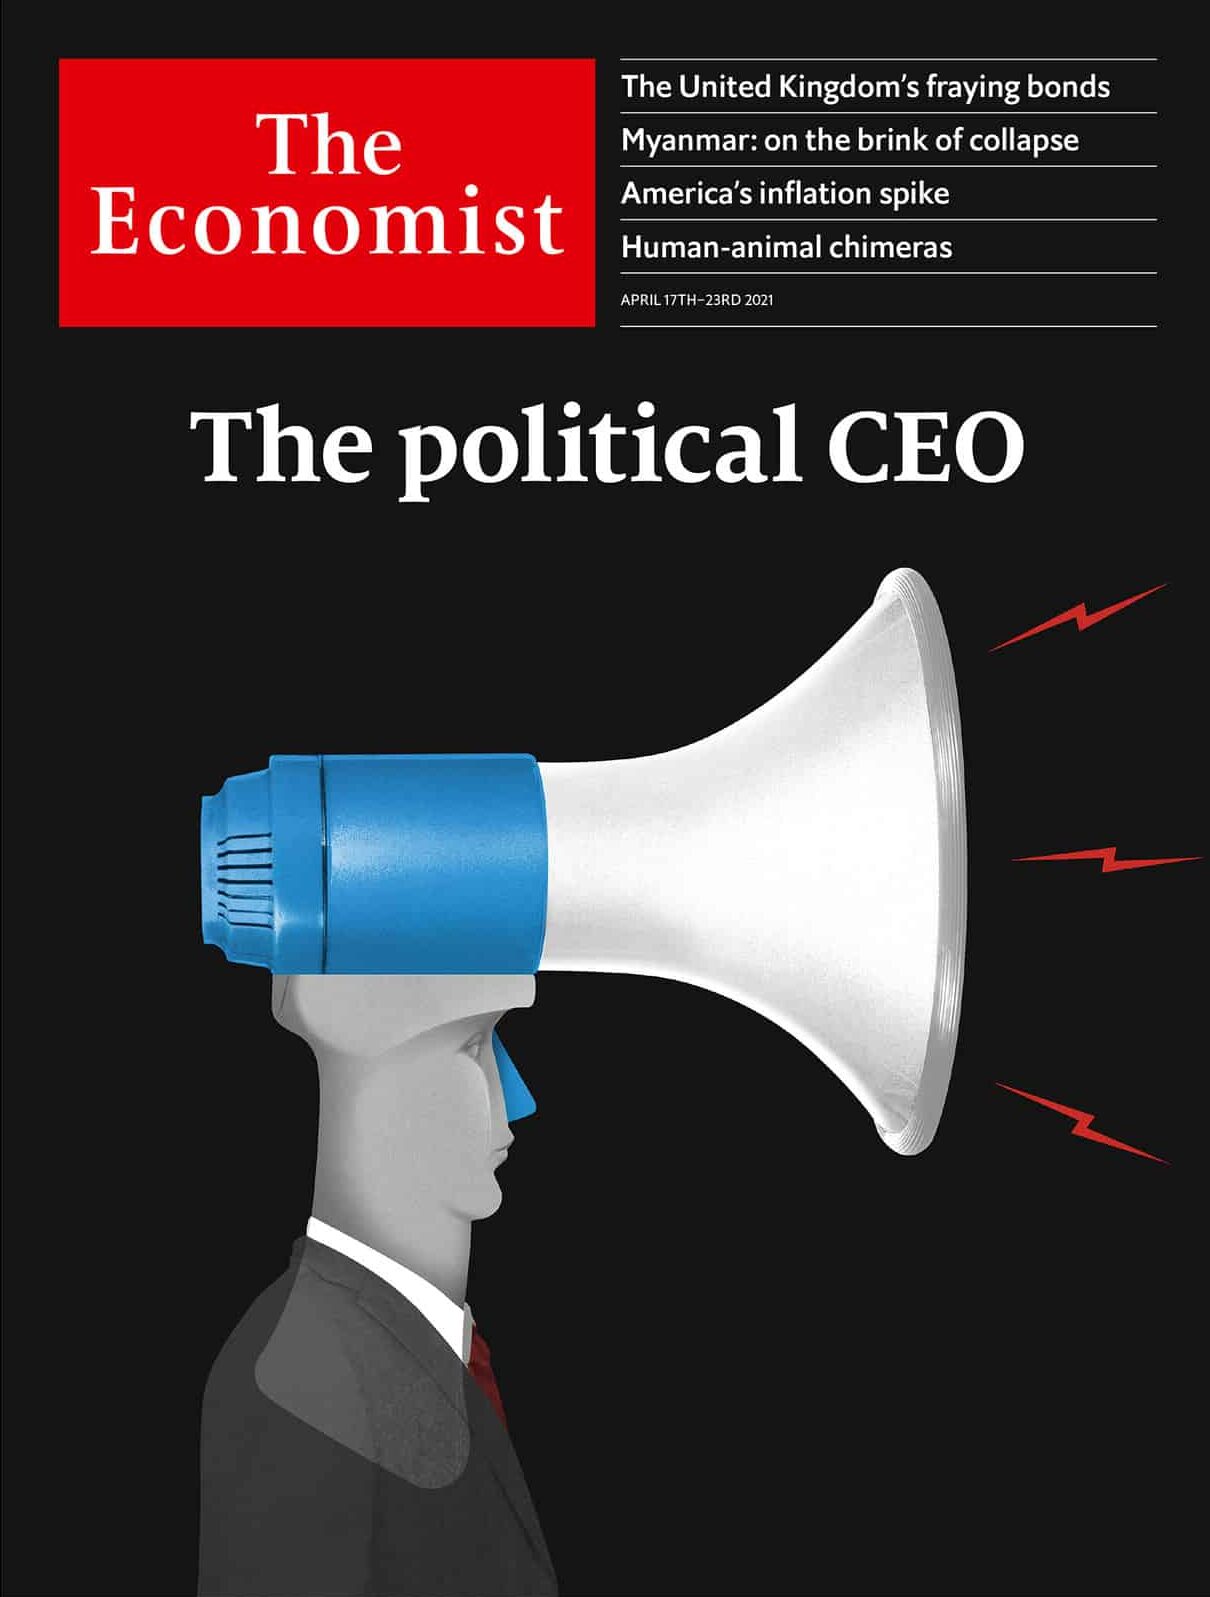 Image of a megaphone and businessman for the economist cover illustrated by Brett Ryder